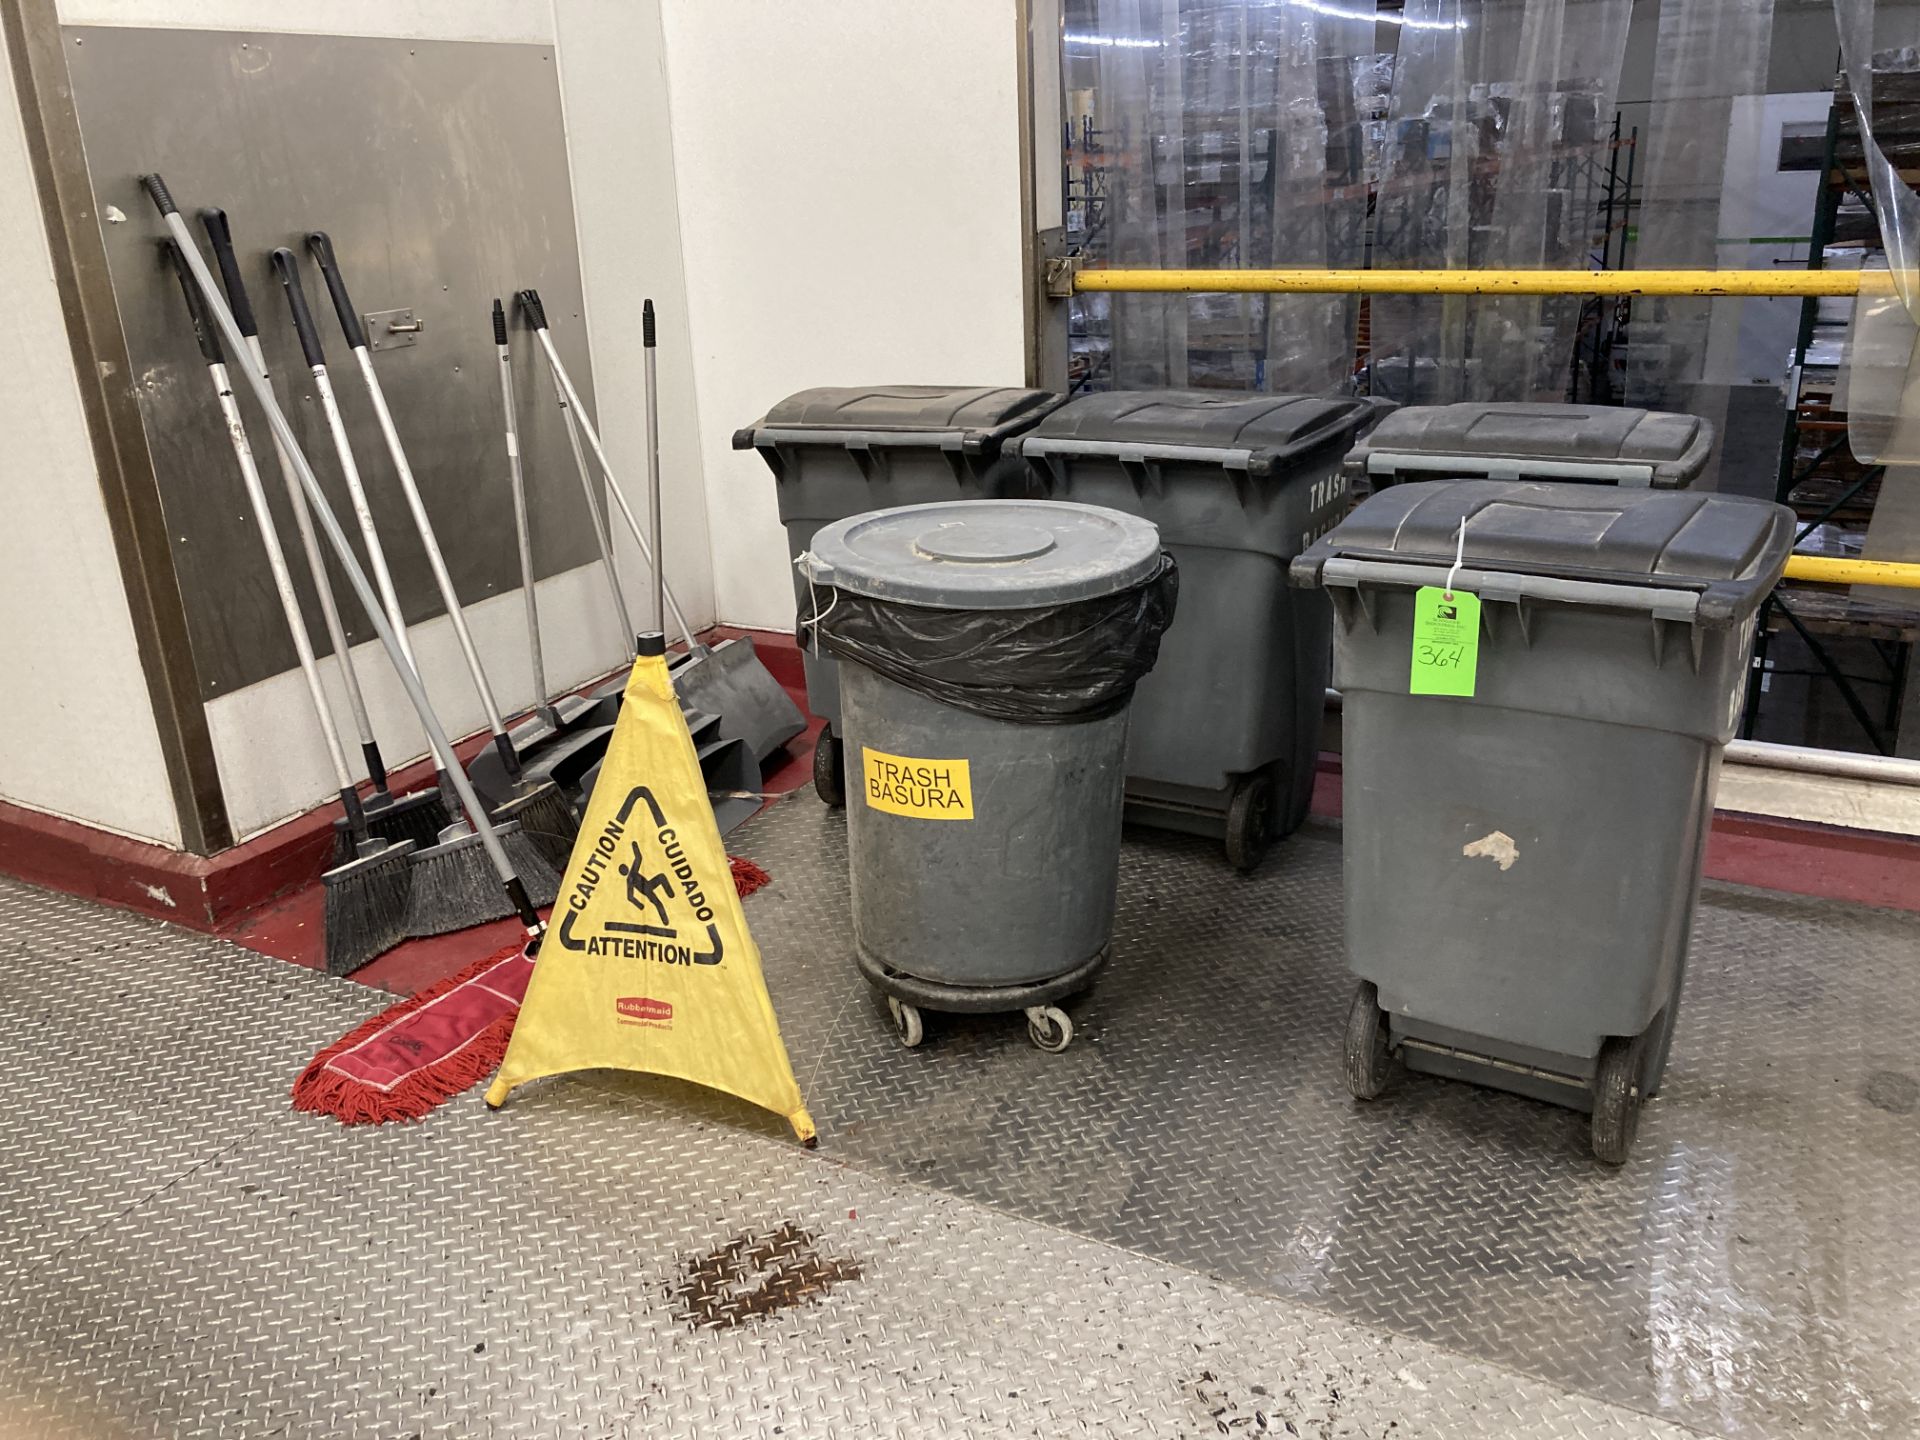 LOT OF waste container , dust mop, brooms, dust pans Rigging Fee: $ 75